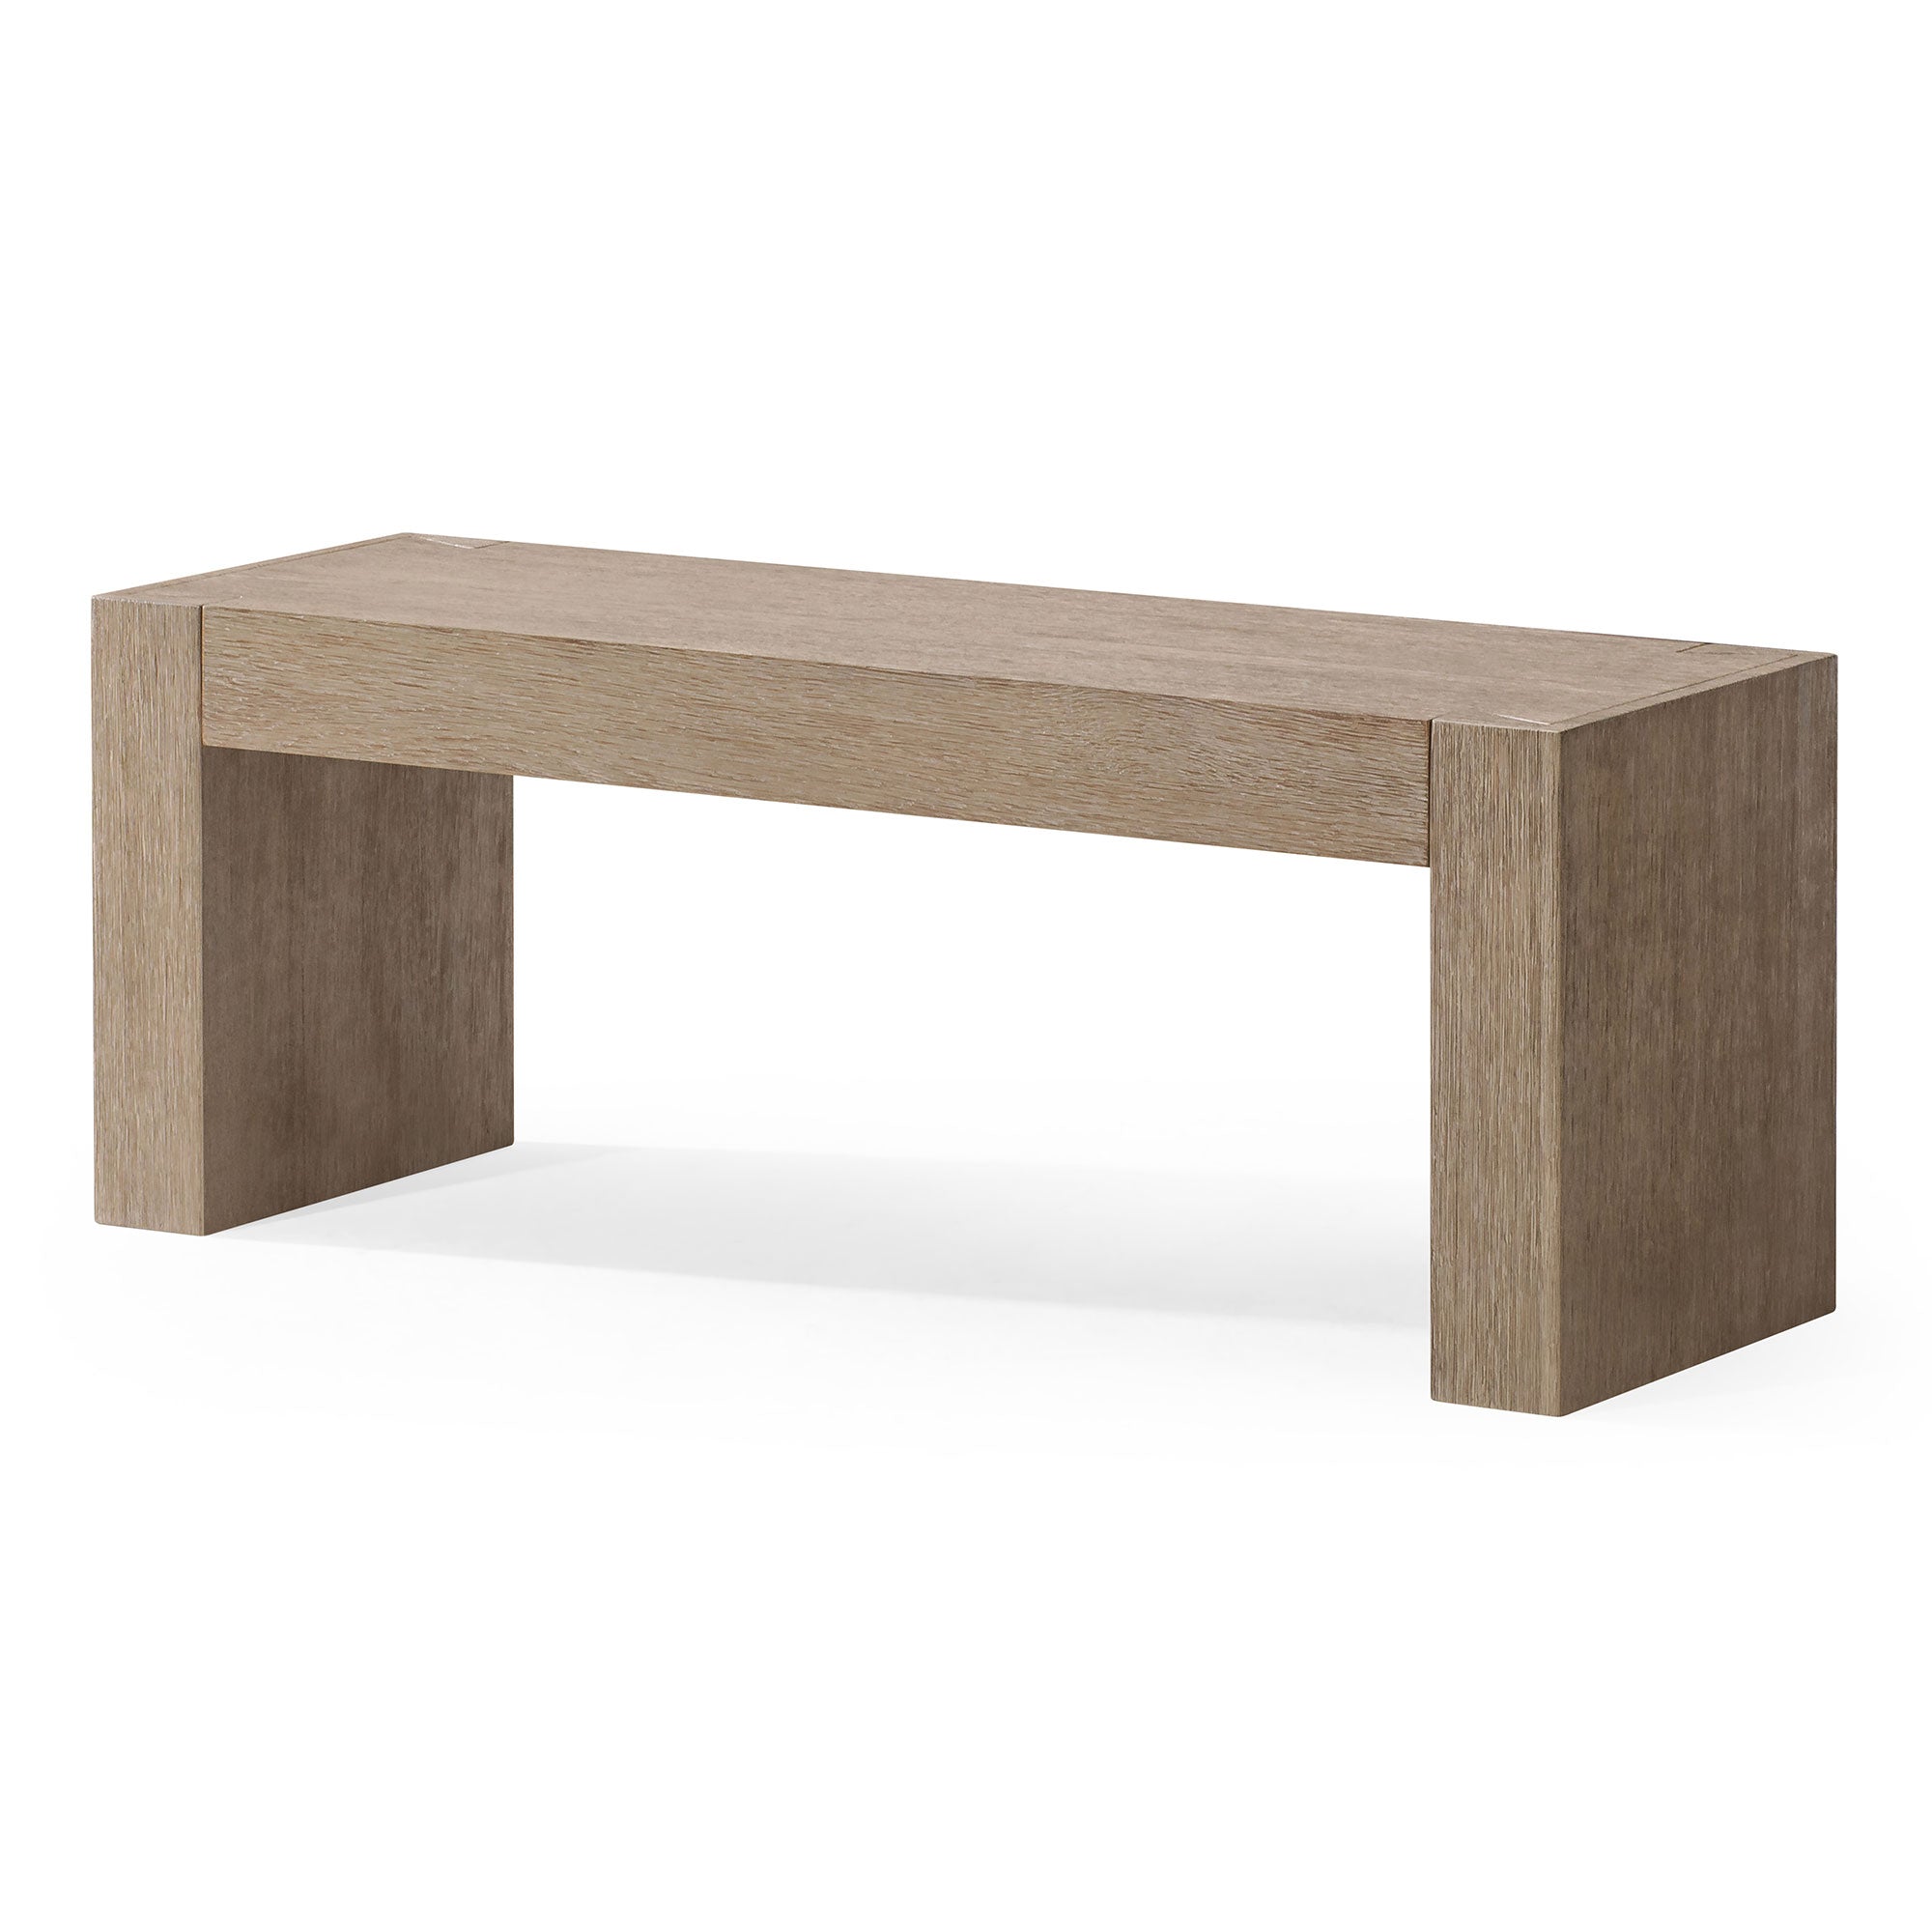 Zeno Contemporary Wooden Bench in Weathered Grey Finish